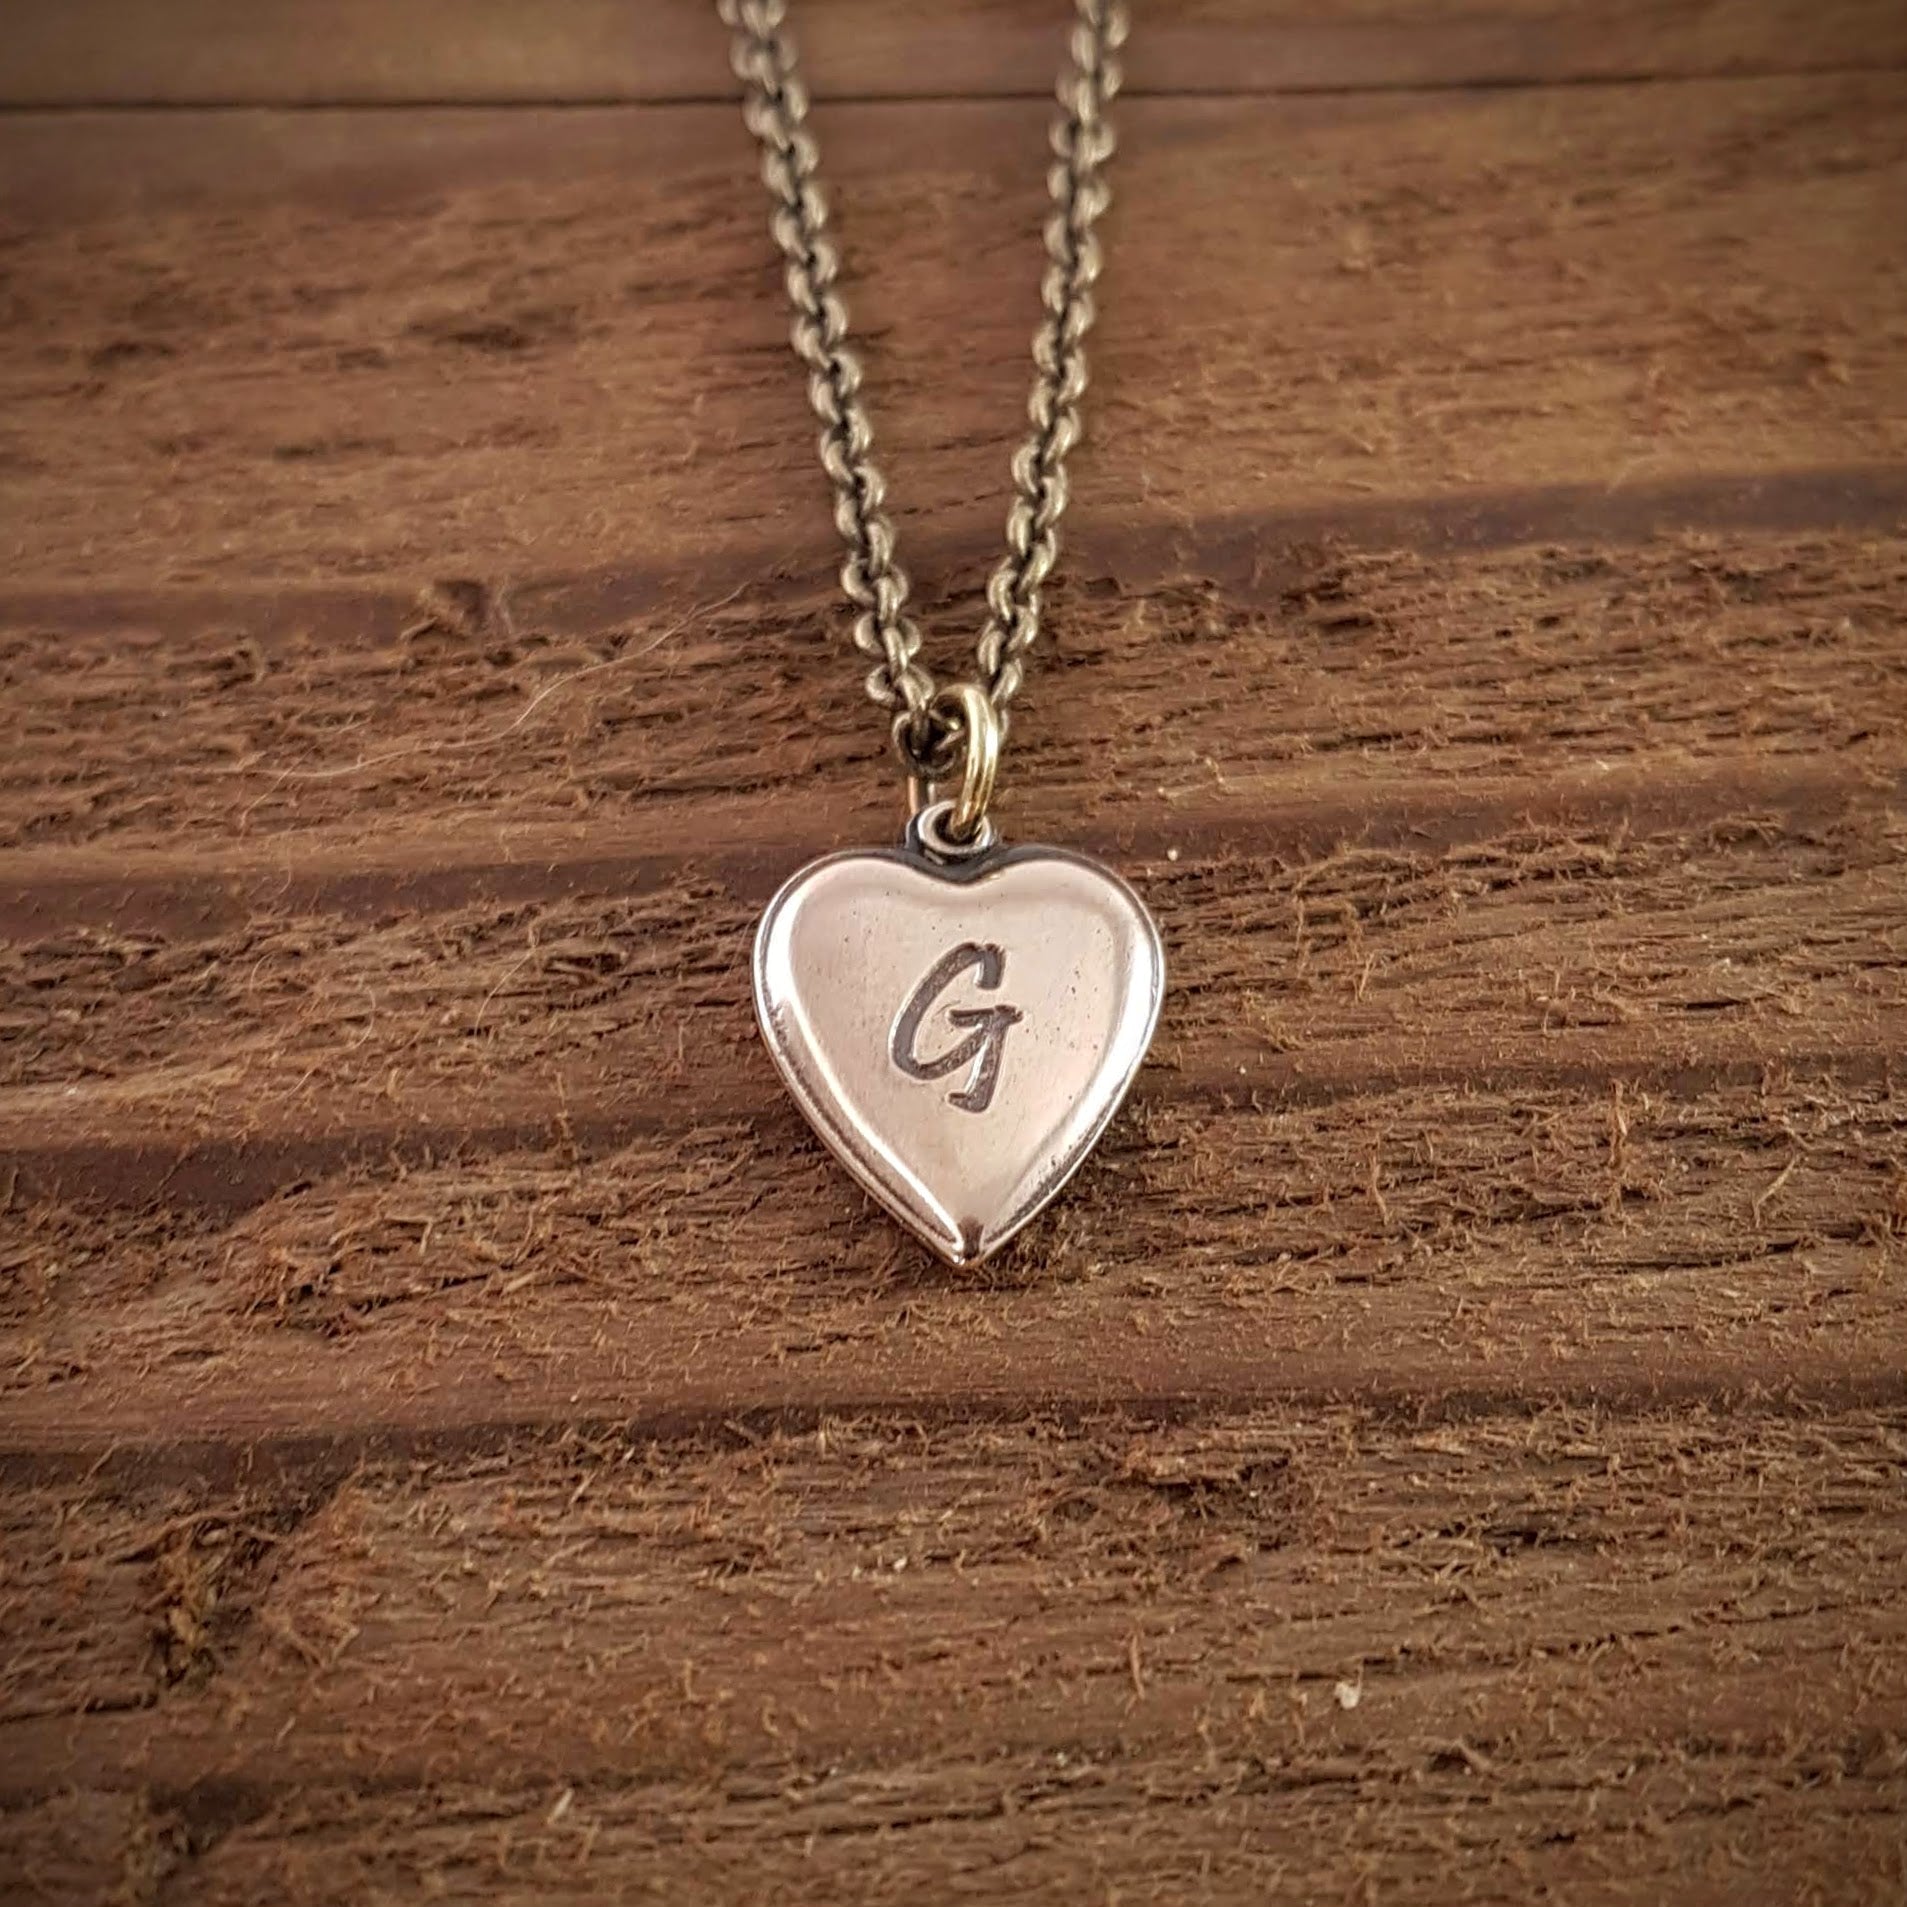 Personalized Heart Necklace - Gwen Delicious Jewelry Designs